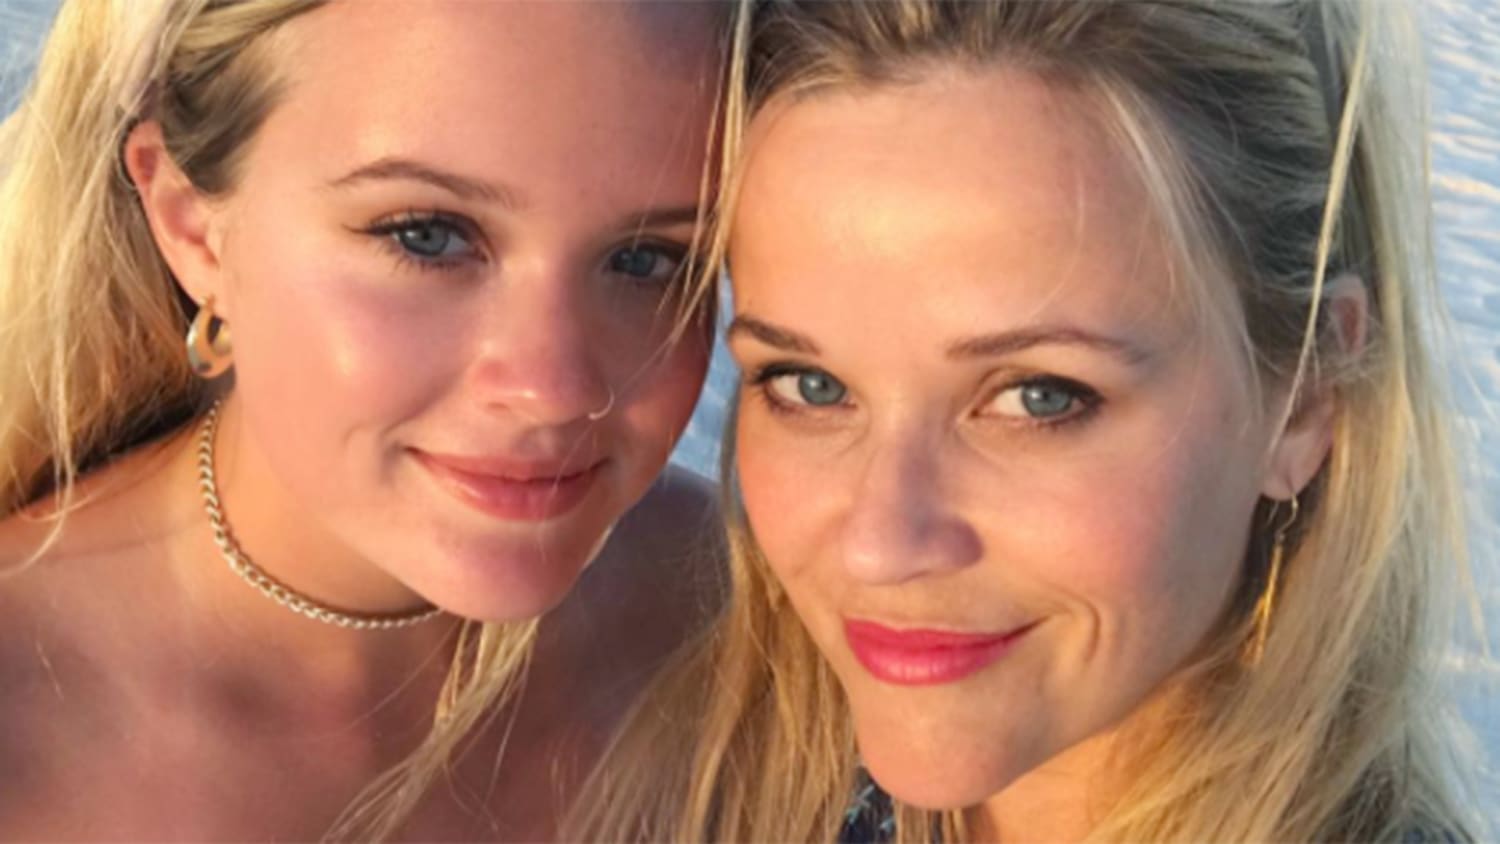 Reese Witherspoon And Her Daughter Look Like Twins In Holiday Selfie